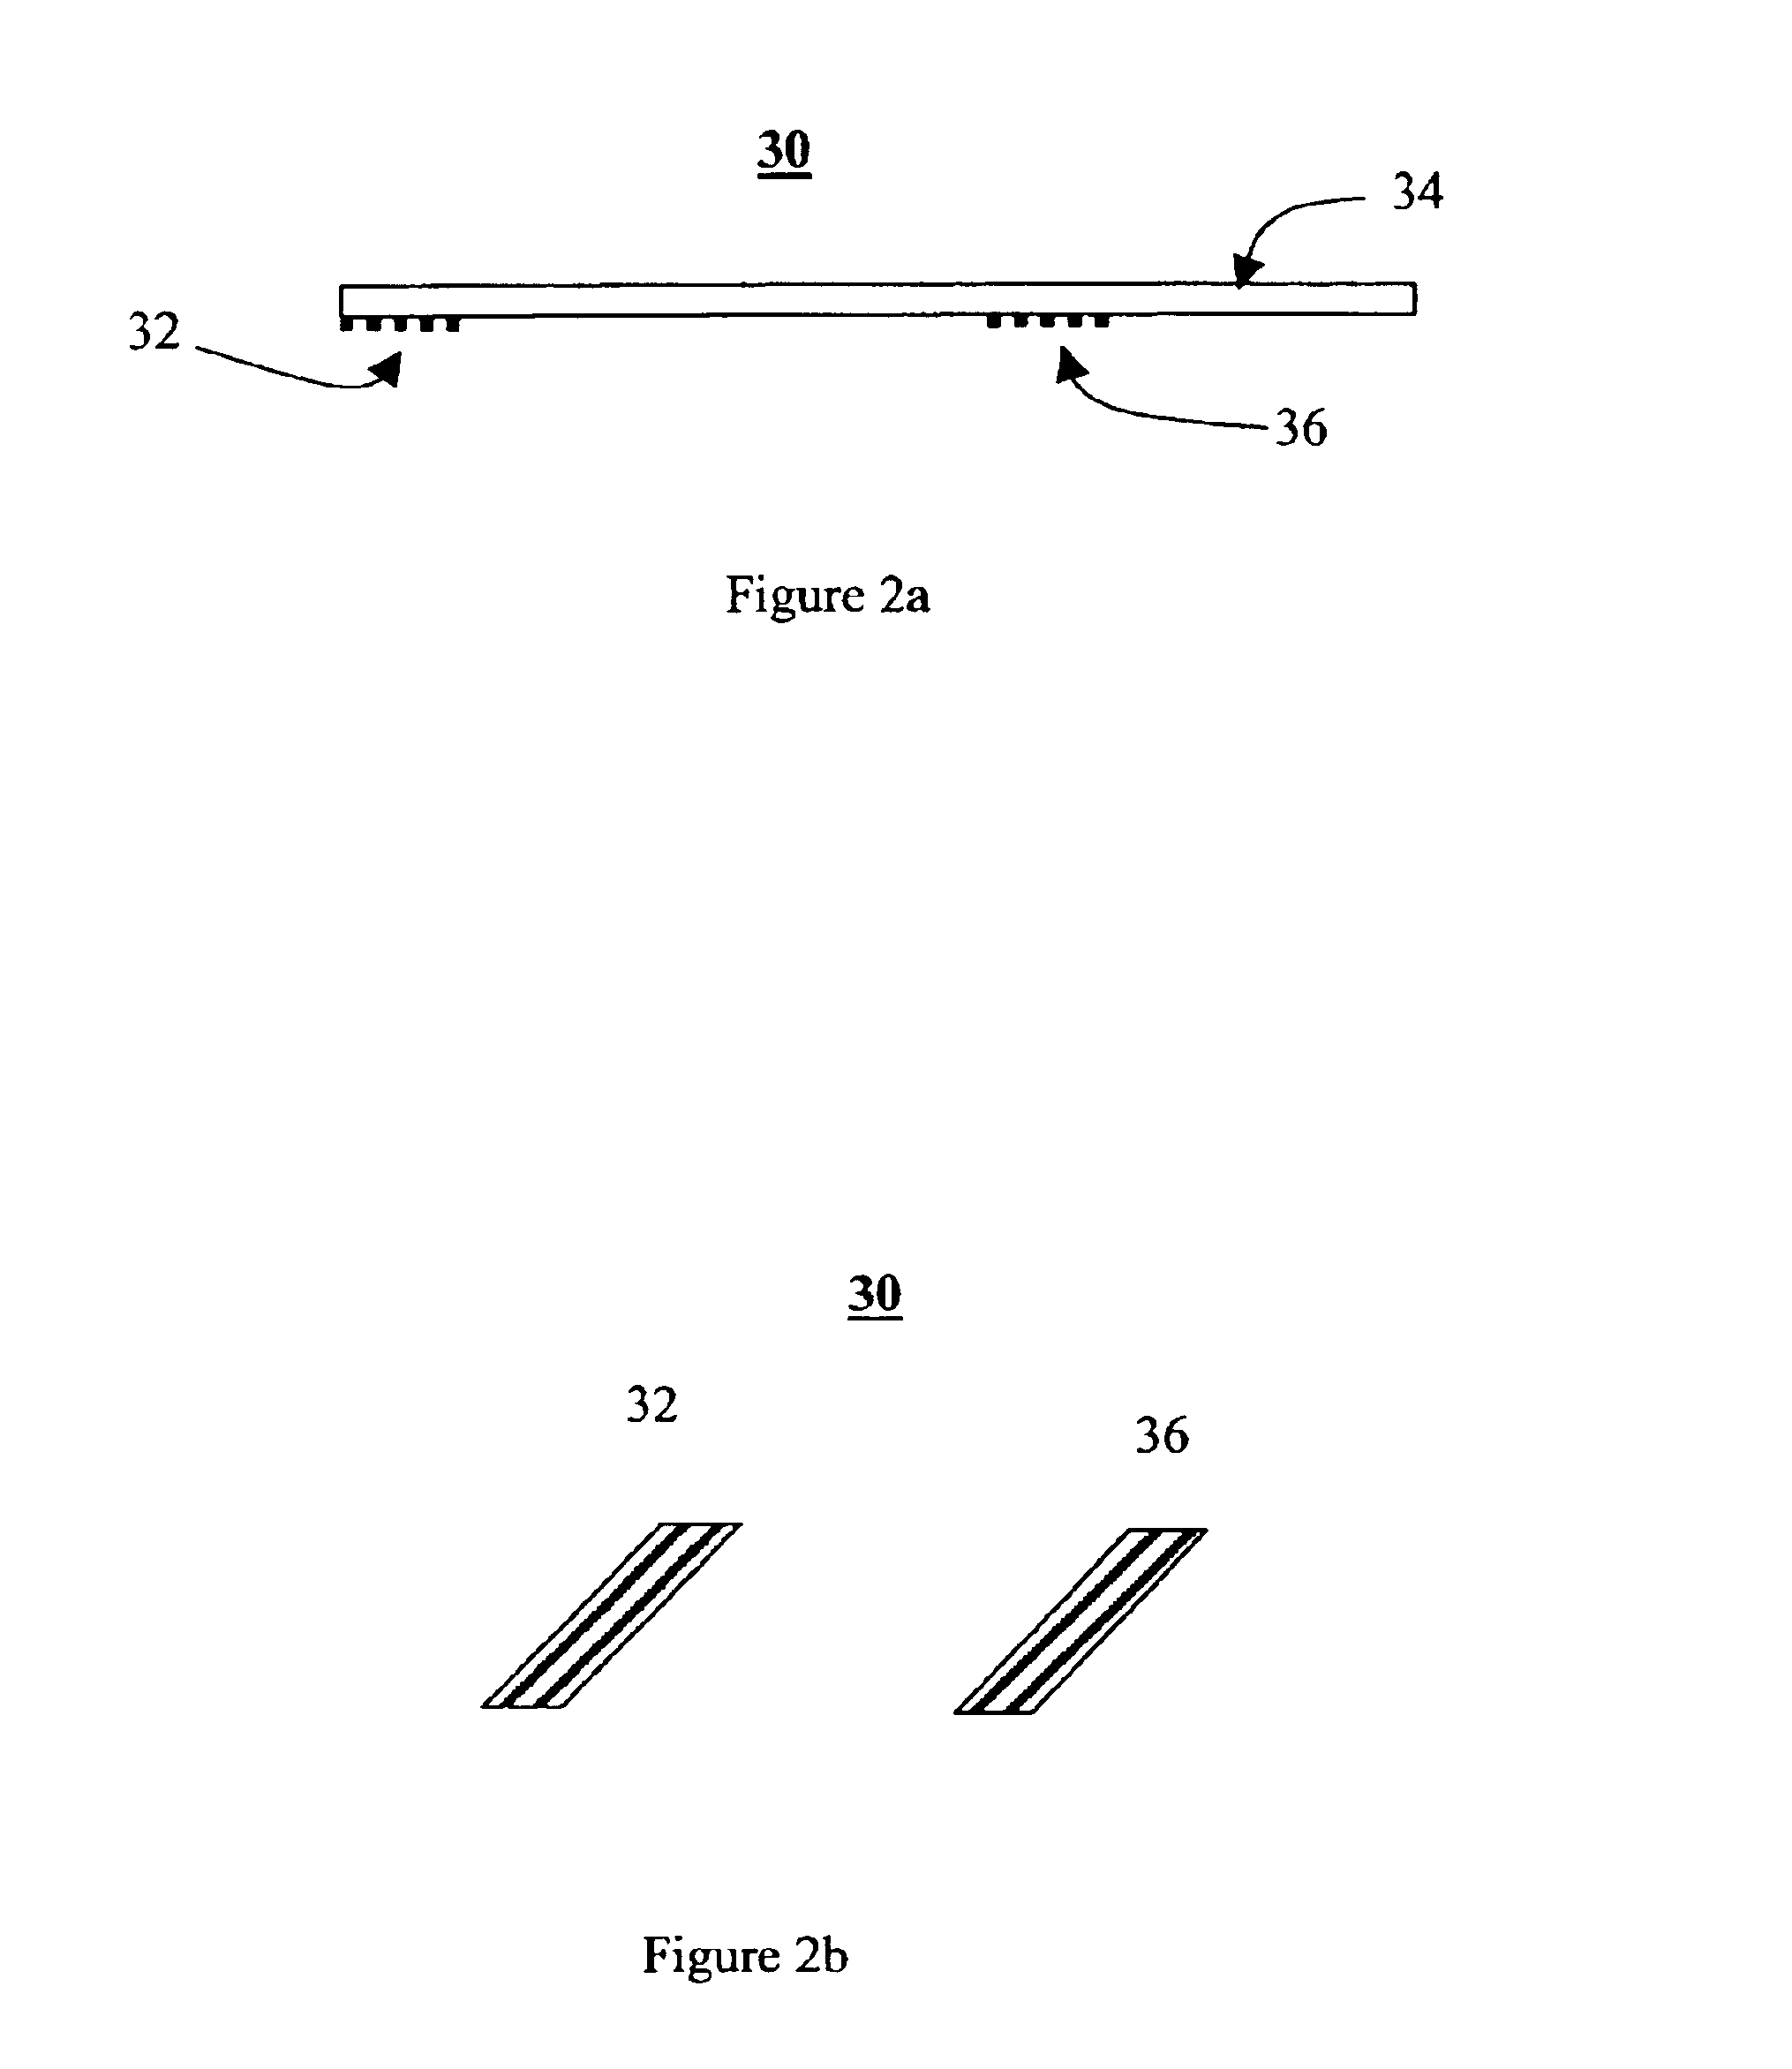 Optical device having a wide field-of-view for multicolor images